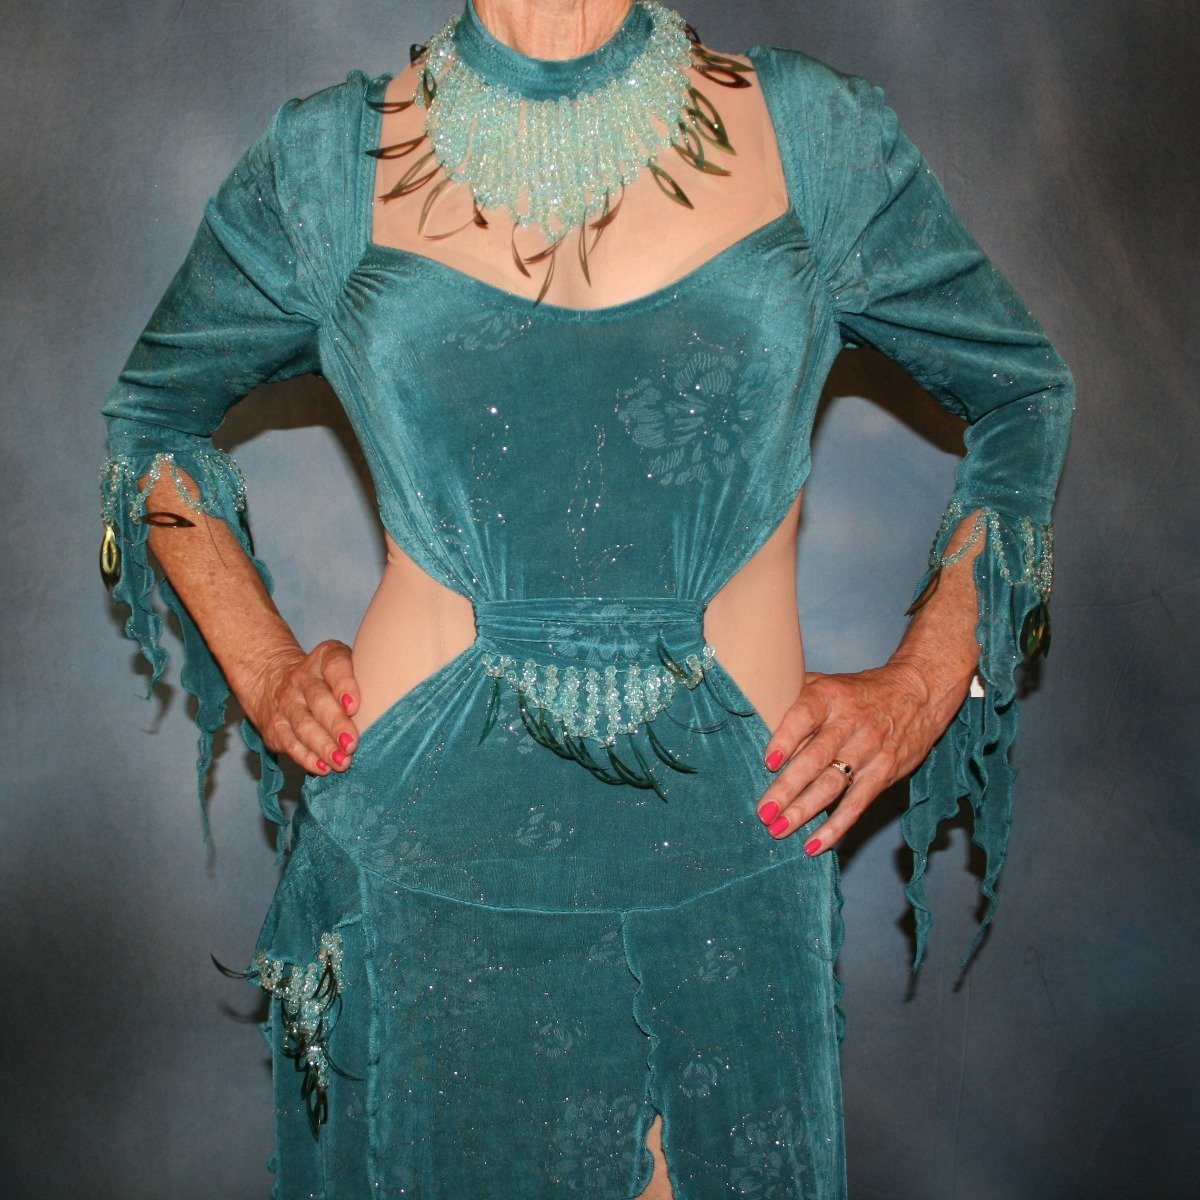 Crystal's Creations close up view of Teal Latin/rhythm dress was created in teal glitter slinky with a subtle gold glitter floral print, embellished with light teal faceted round lucite beading & teal spangles, includes a matching neckpiece.